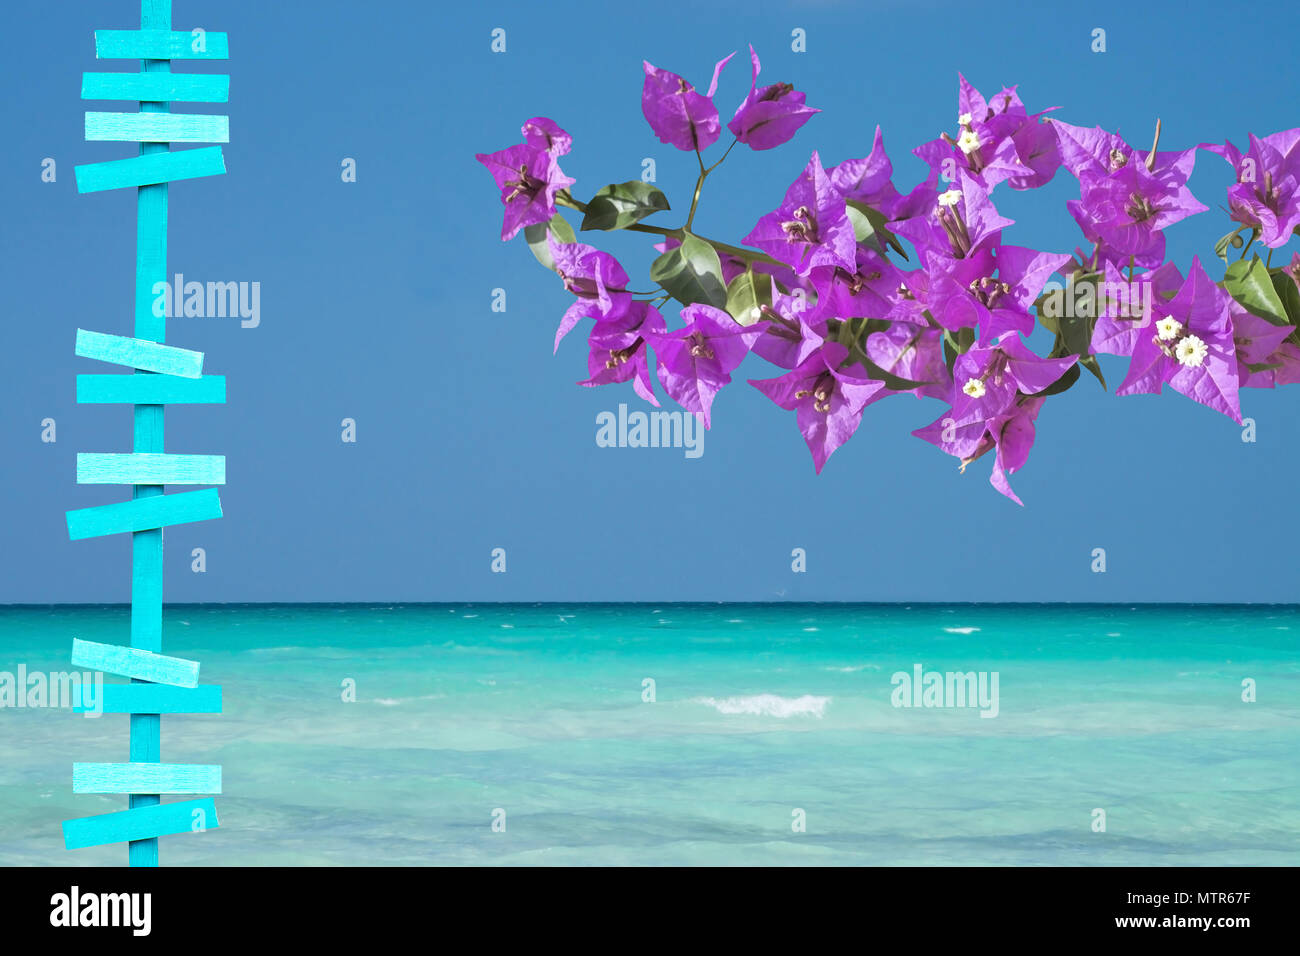 Beautiful ocean landscape with sea sky and horizon and pink bougainvillea turquoise wooden signpost decor background Stock Photo